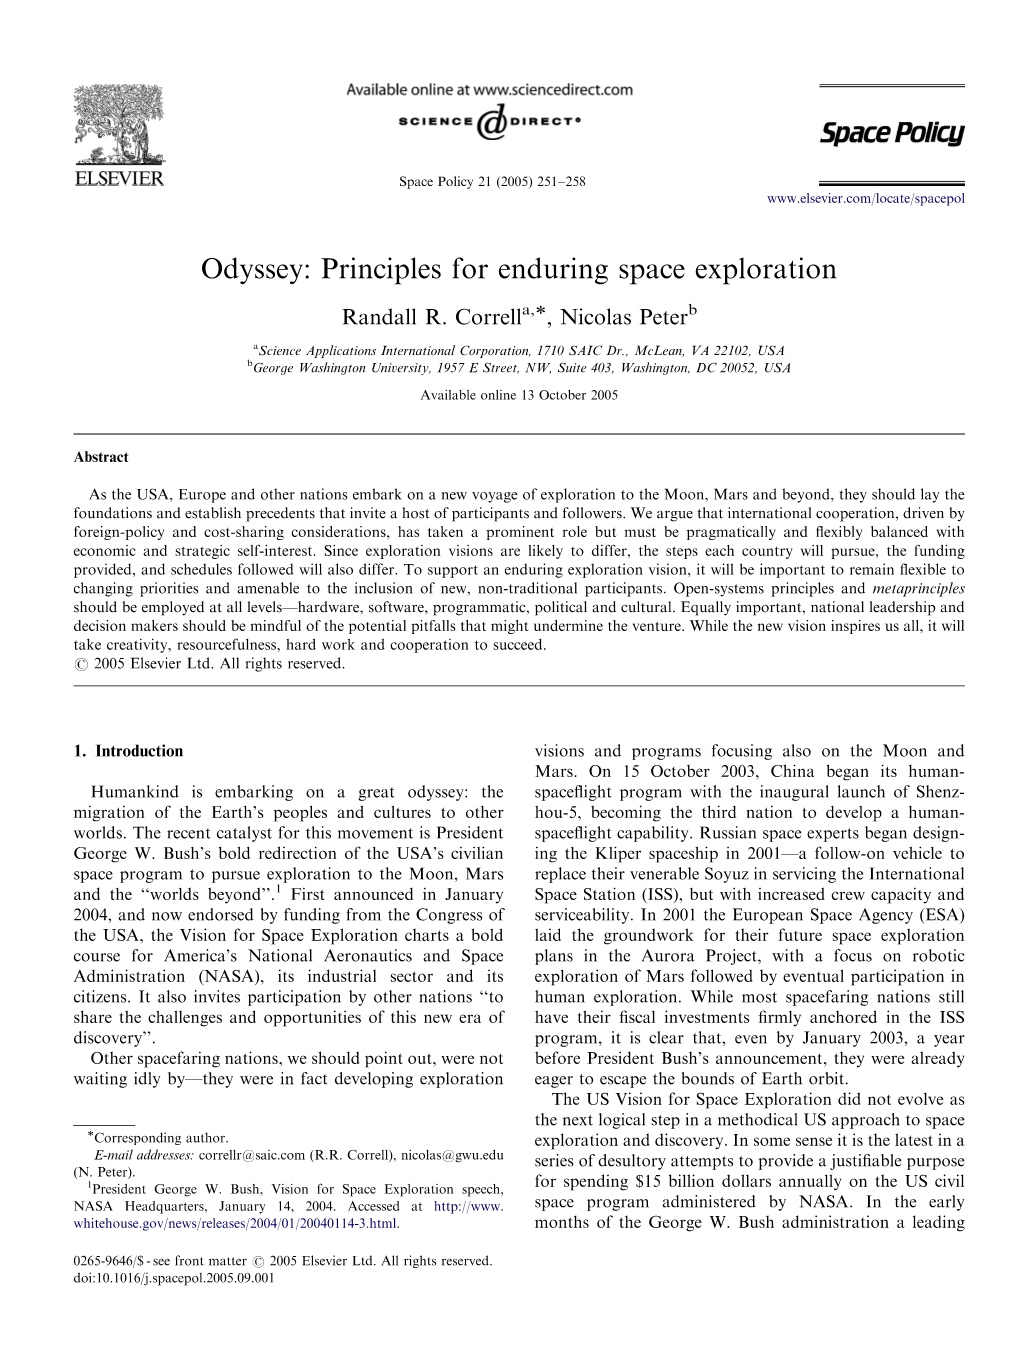 Odyssey: Principles for Enduring Space Exploration